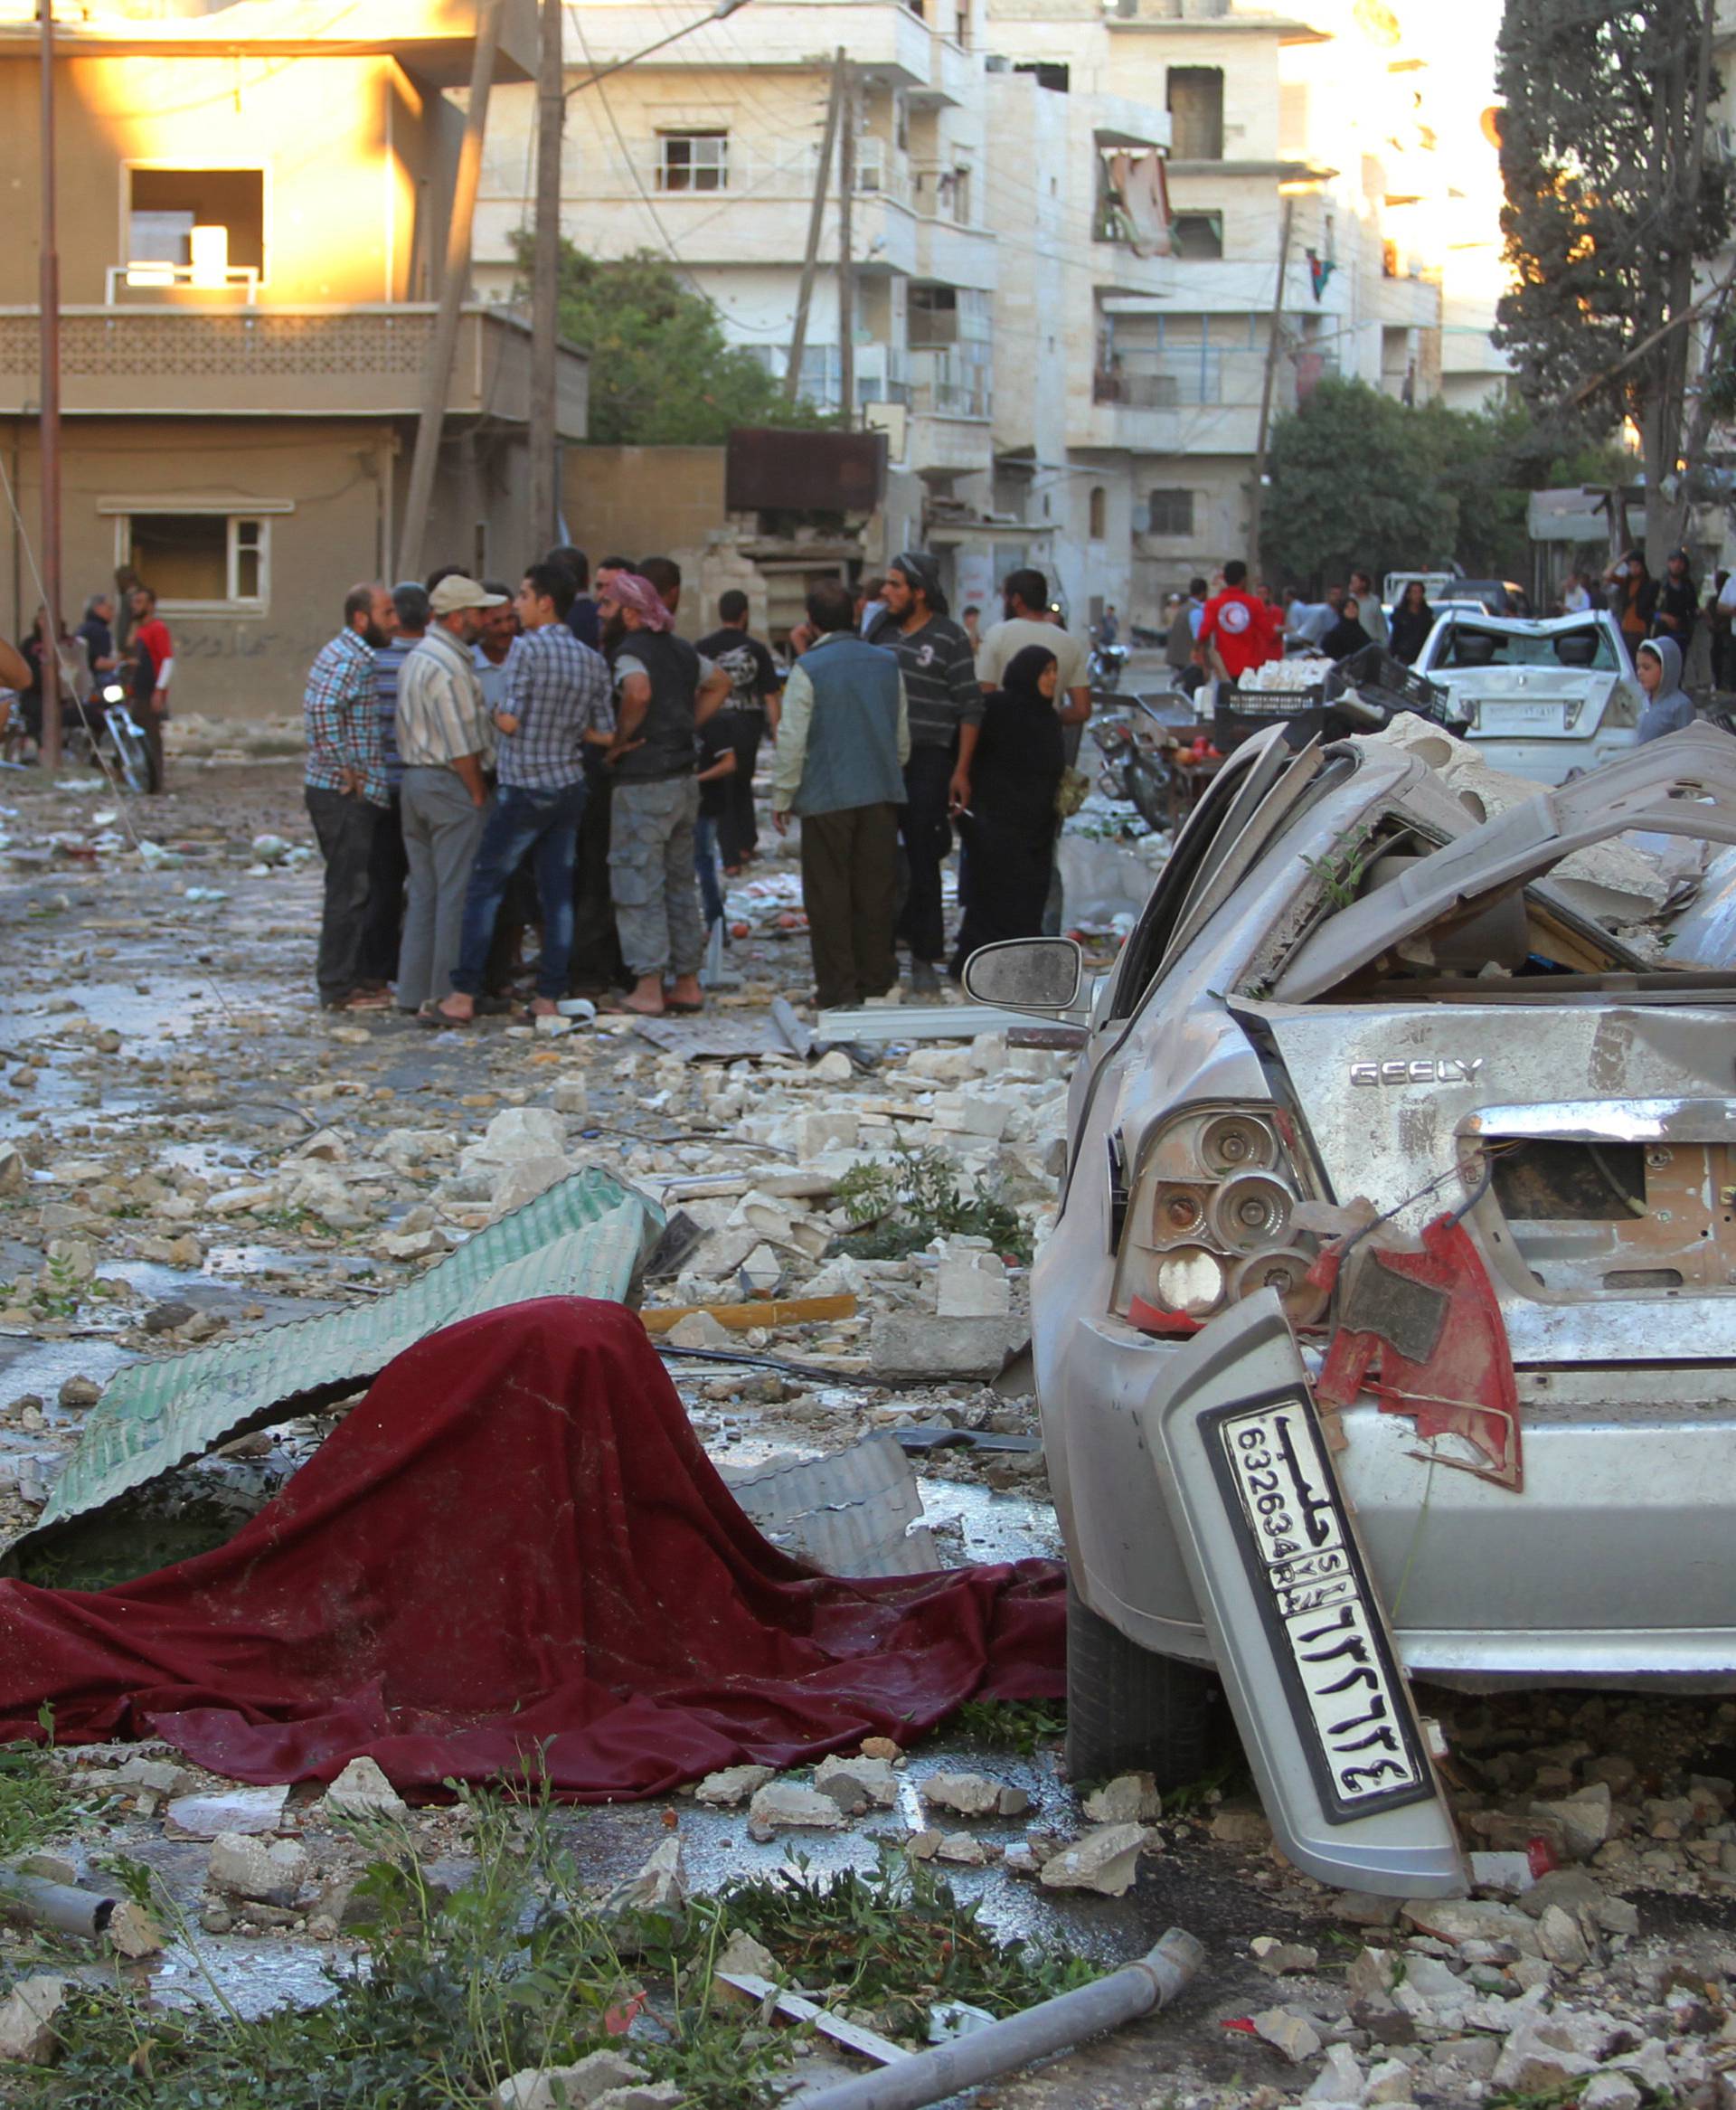 People inspect the damage at a site hit by airstrikes in Idlib